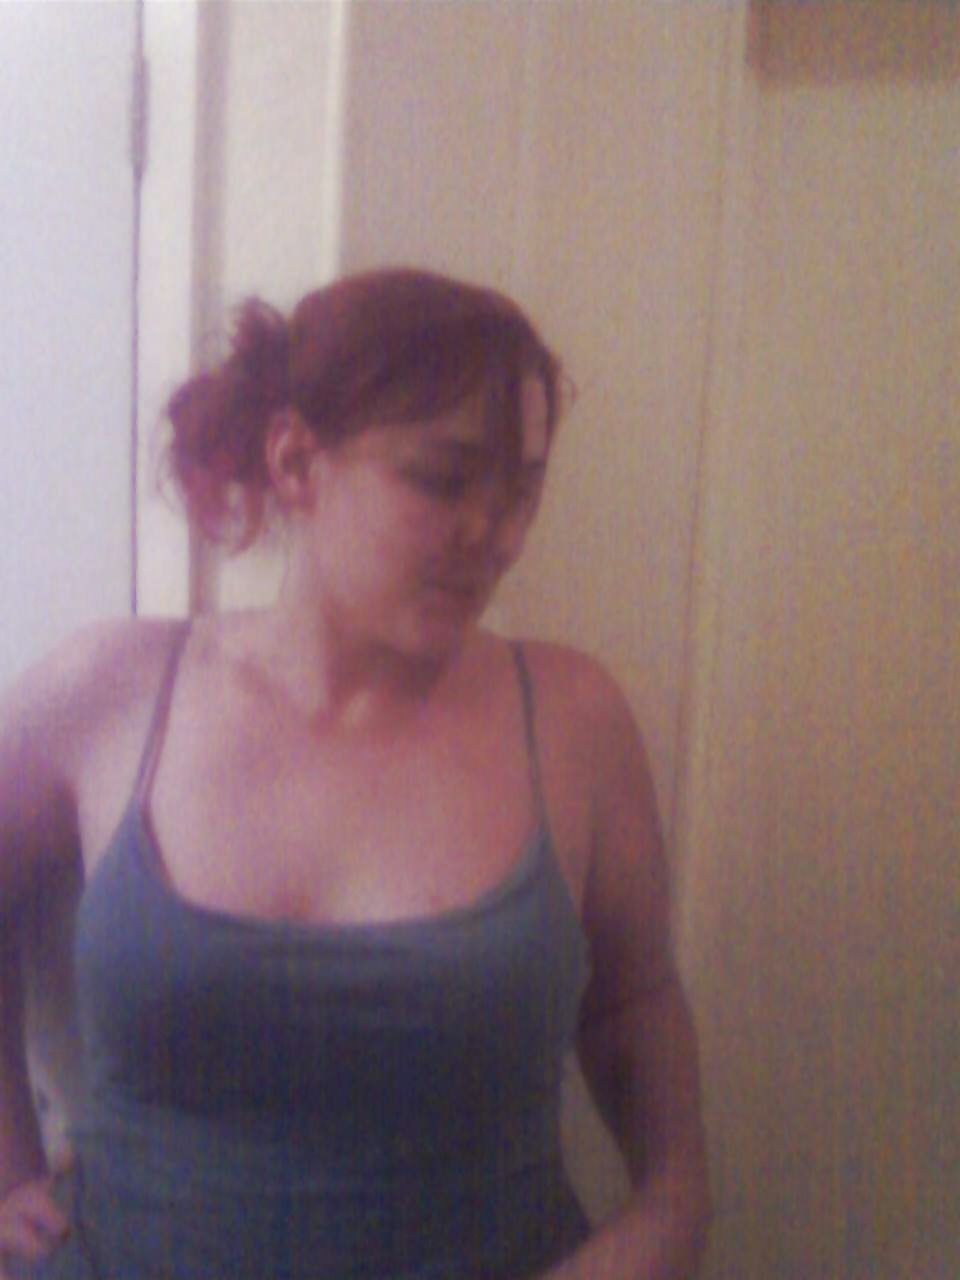 Red haired crack head adult photos